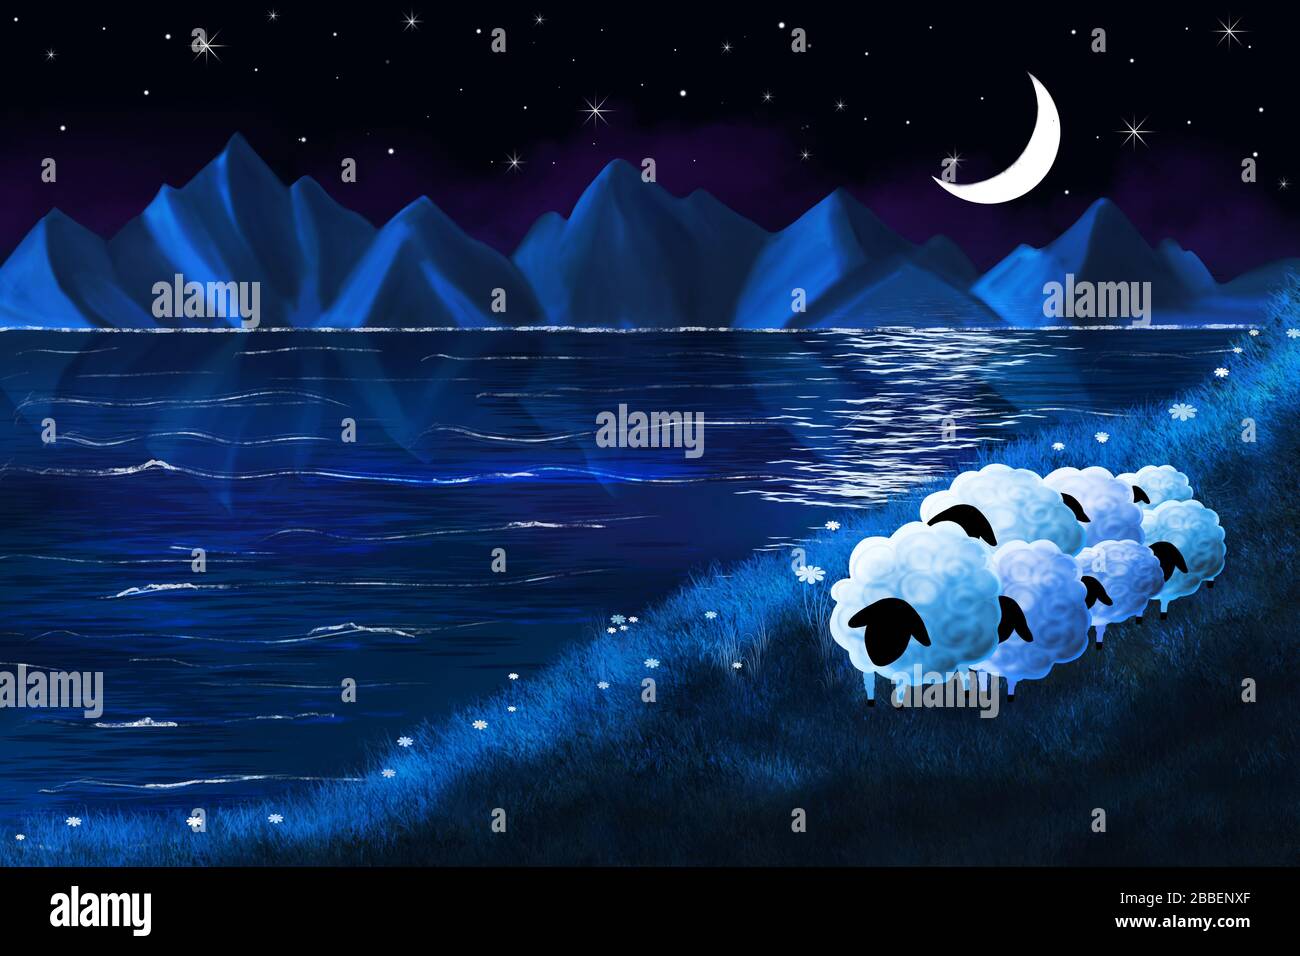 Seven lambs in the moonlight on the seashore. Illustration in blue night colors. Stock Photo